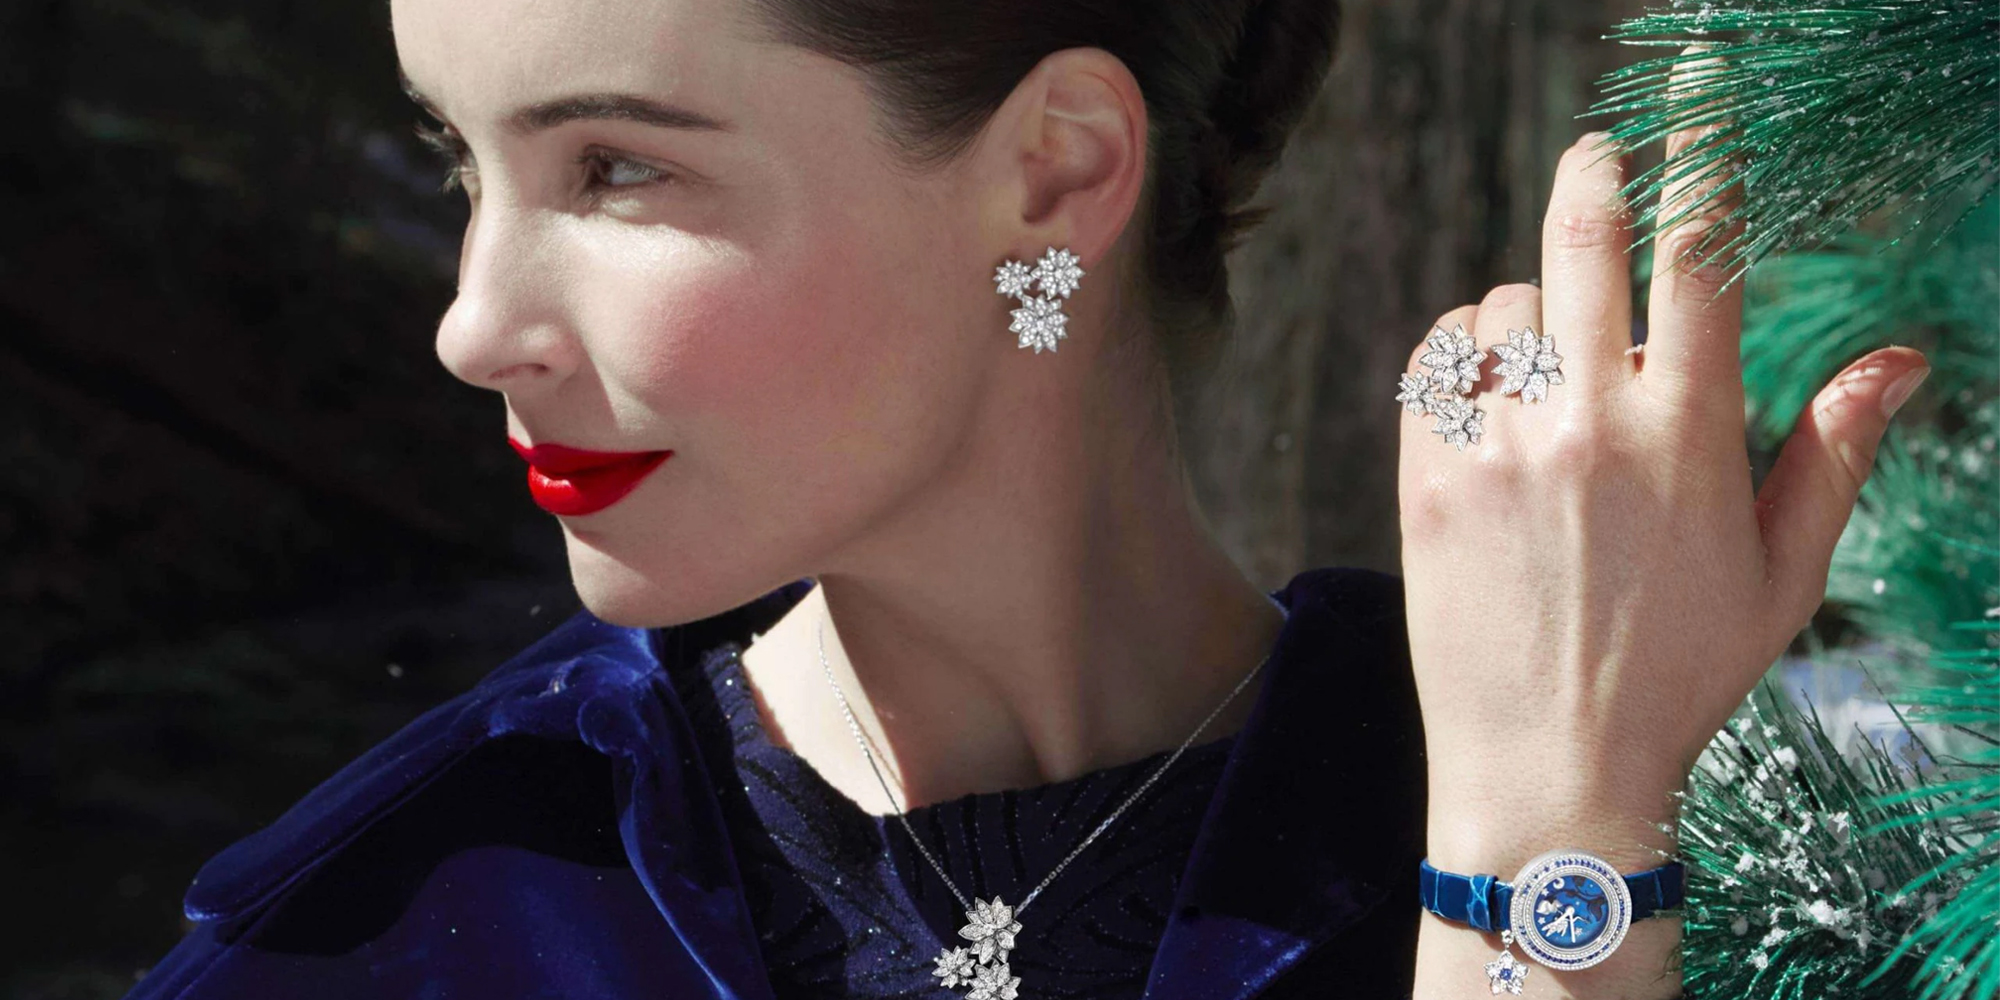 SHOP THE VAN CLEEF & ARPELS HOLIDAY 2021 COLLECTION FILM